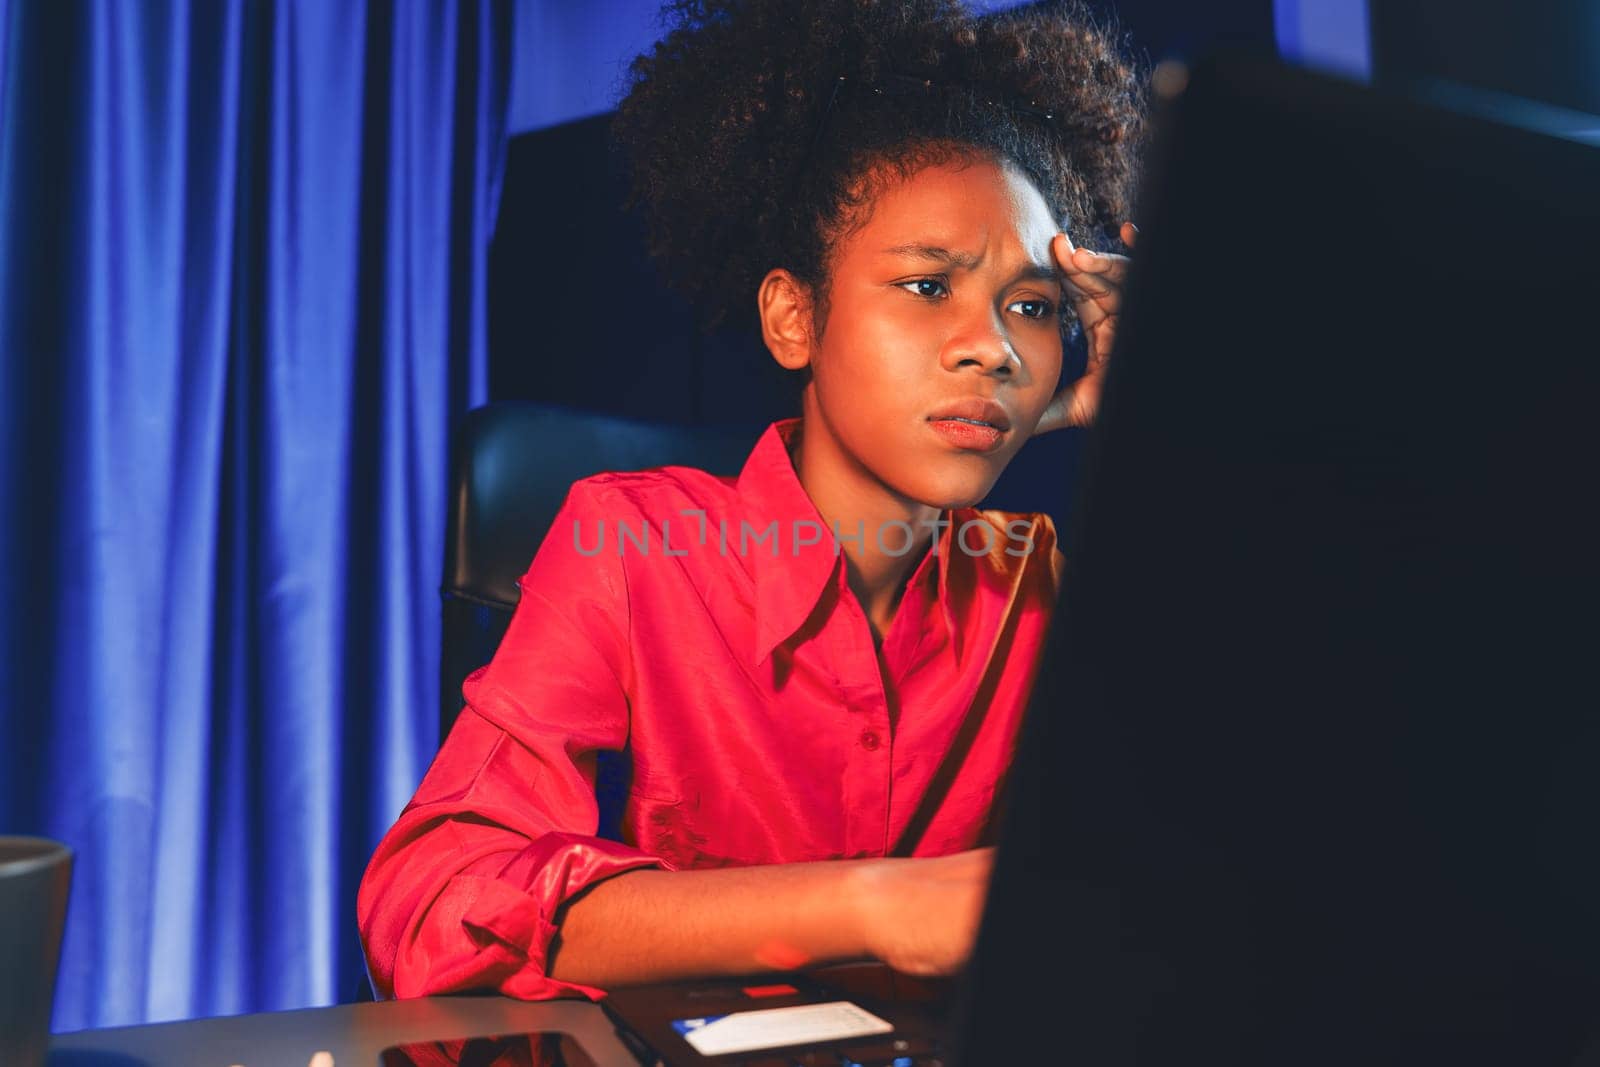 African woman businesswoman or blogger wearing pink shirt with serious face, looking and focusing on screen laptop with struggle project. Concept of stressful expression at work from home. Tastemaker.